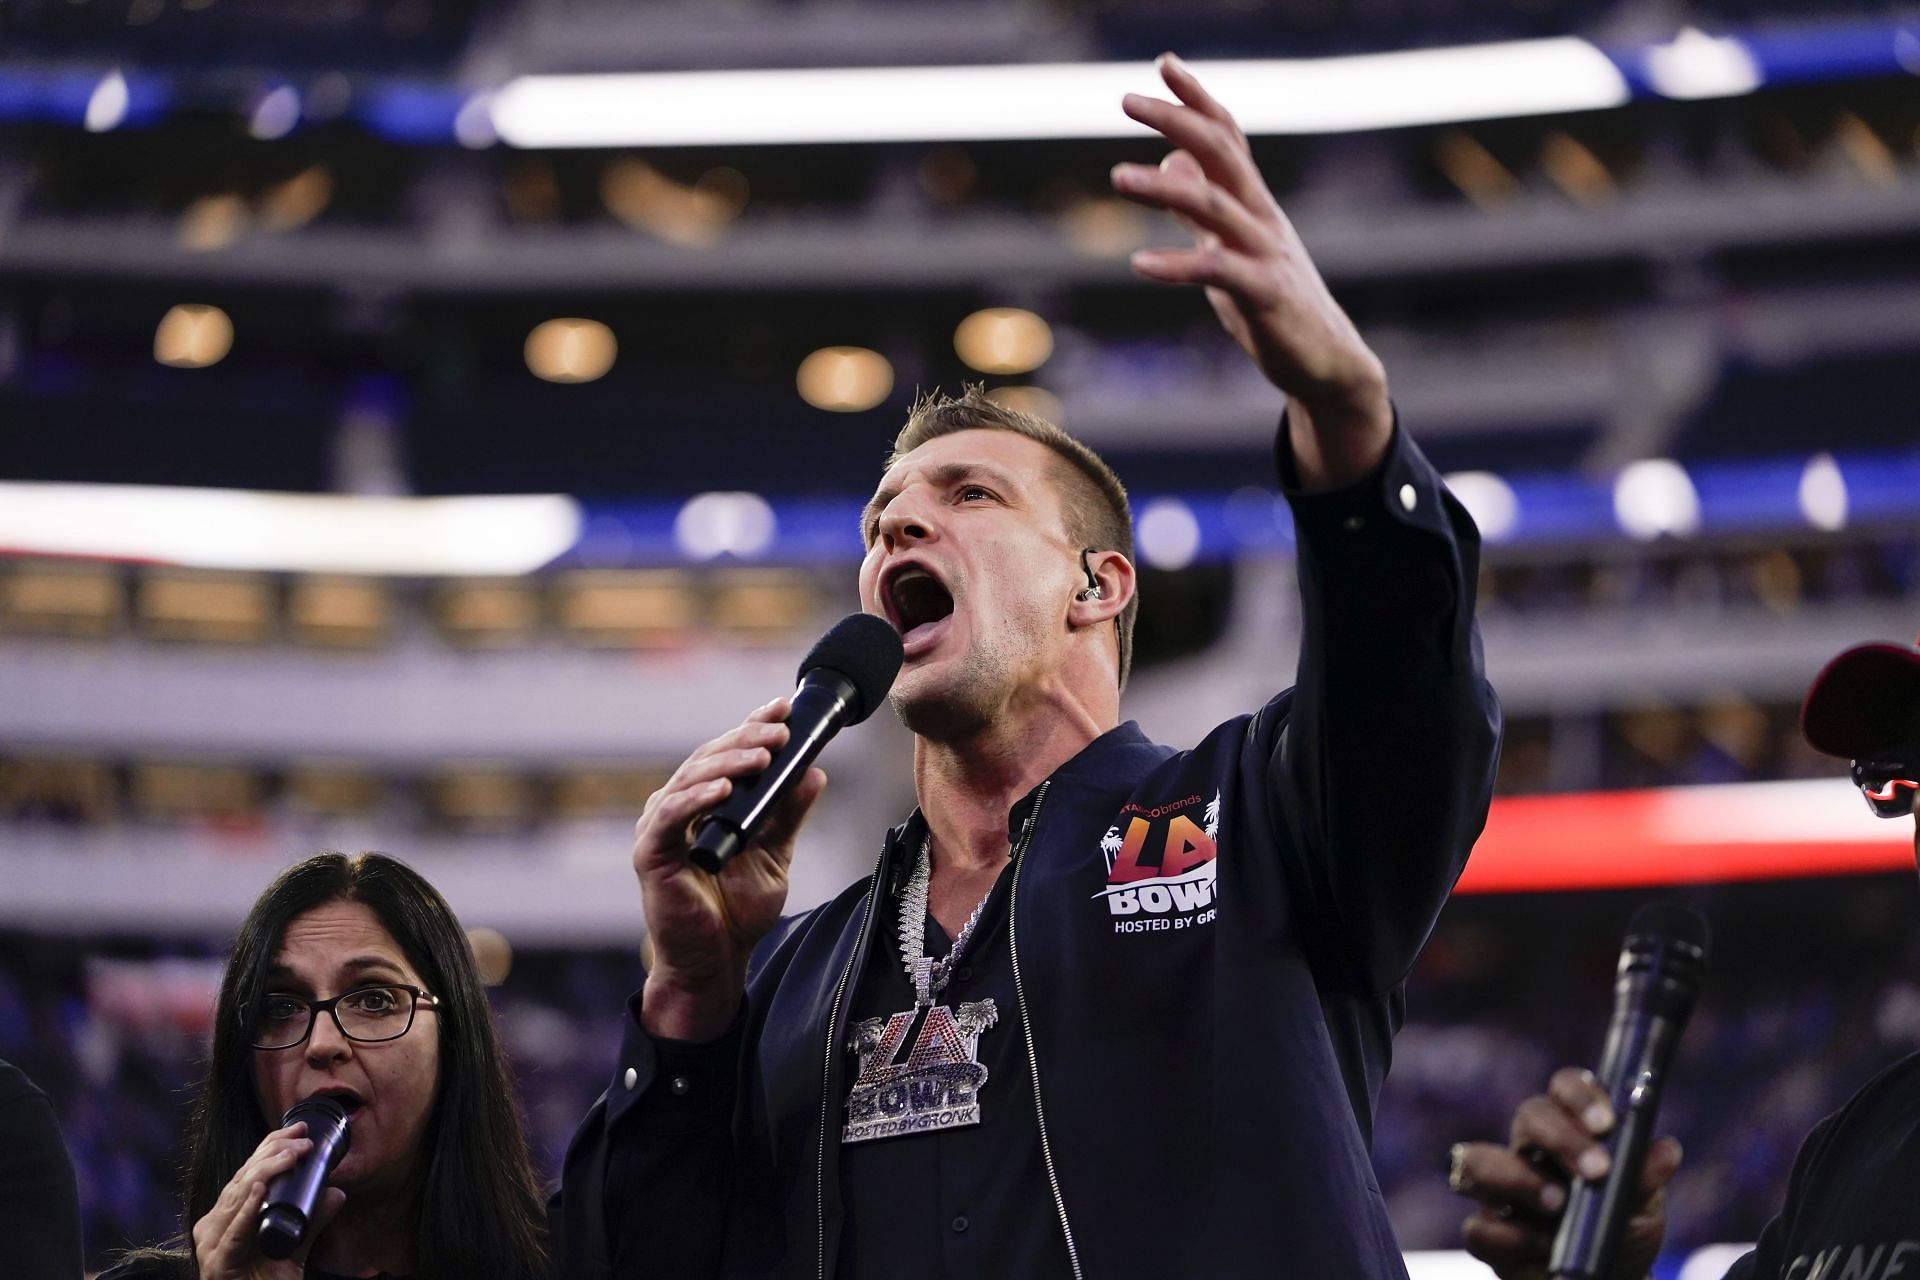 CFB fans blast 4x Super Bowl champ Rob Gronkowski for off-pitch national anthem attempt at LA Bowl: "Nice try, but you're tone deaf"